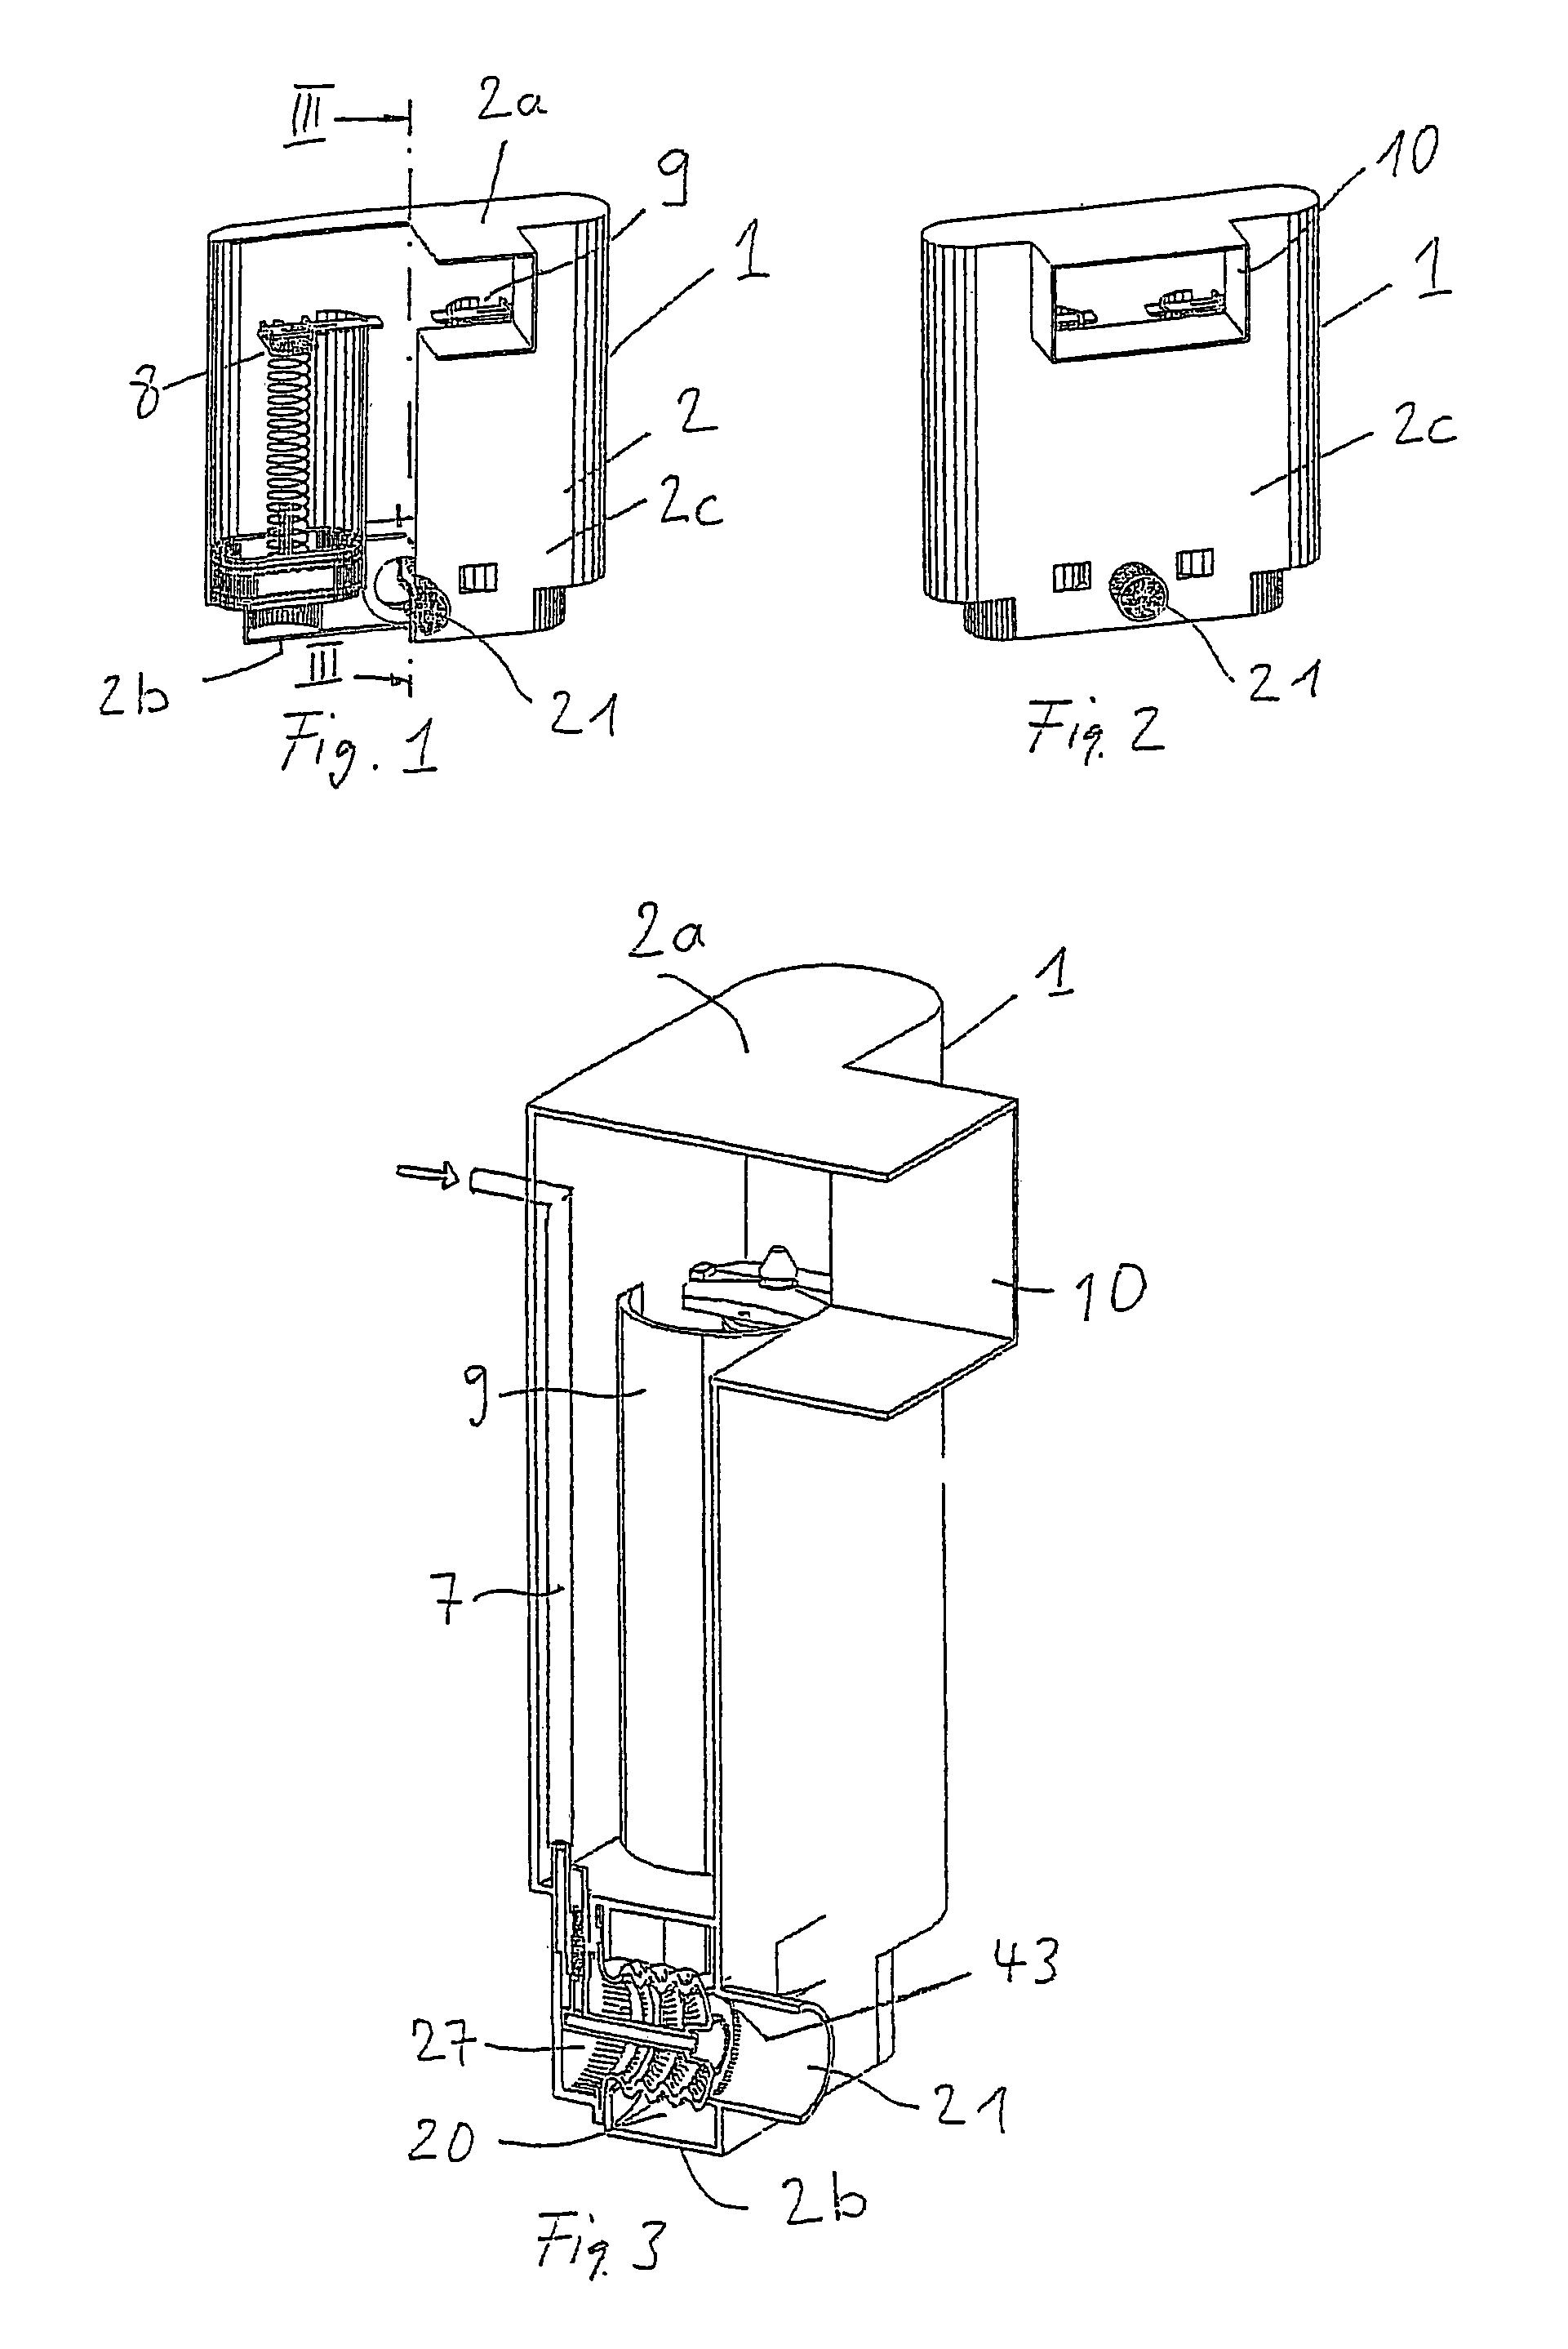 Flushing device for a lavatory